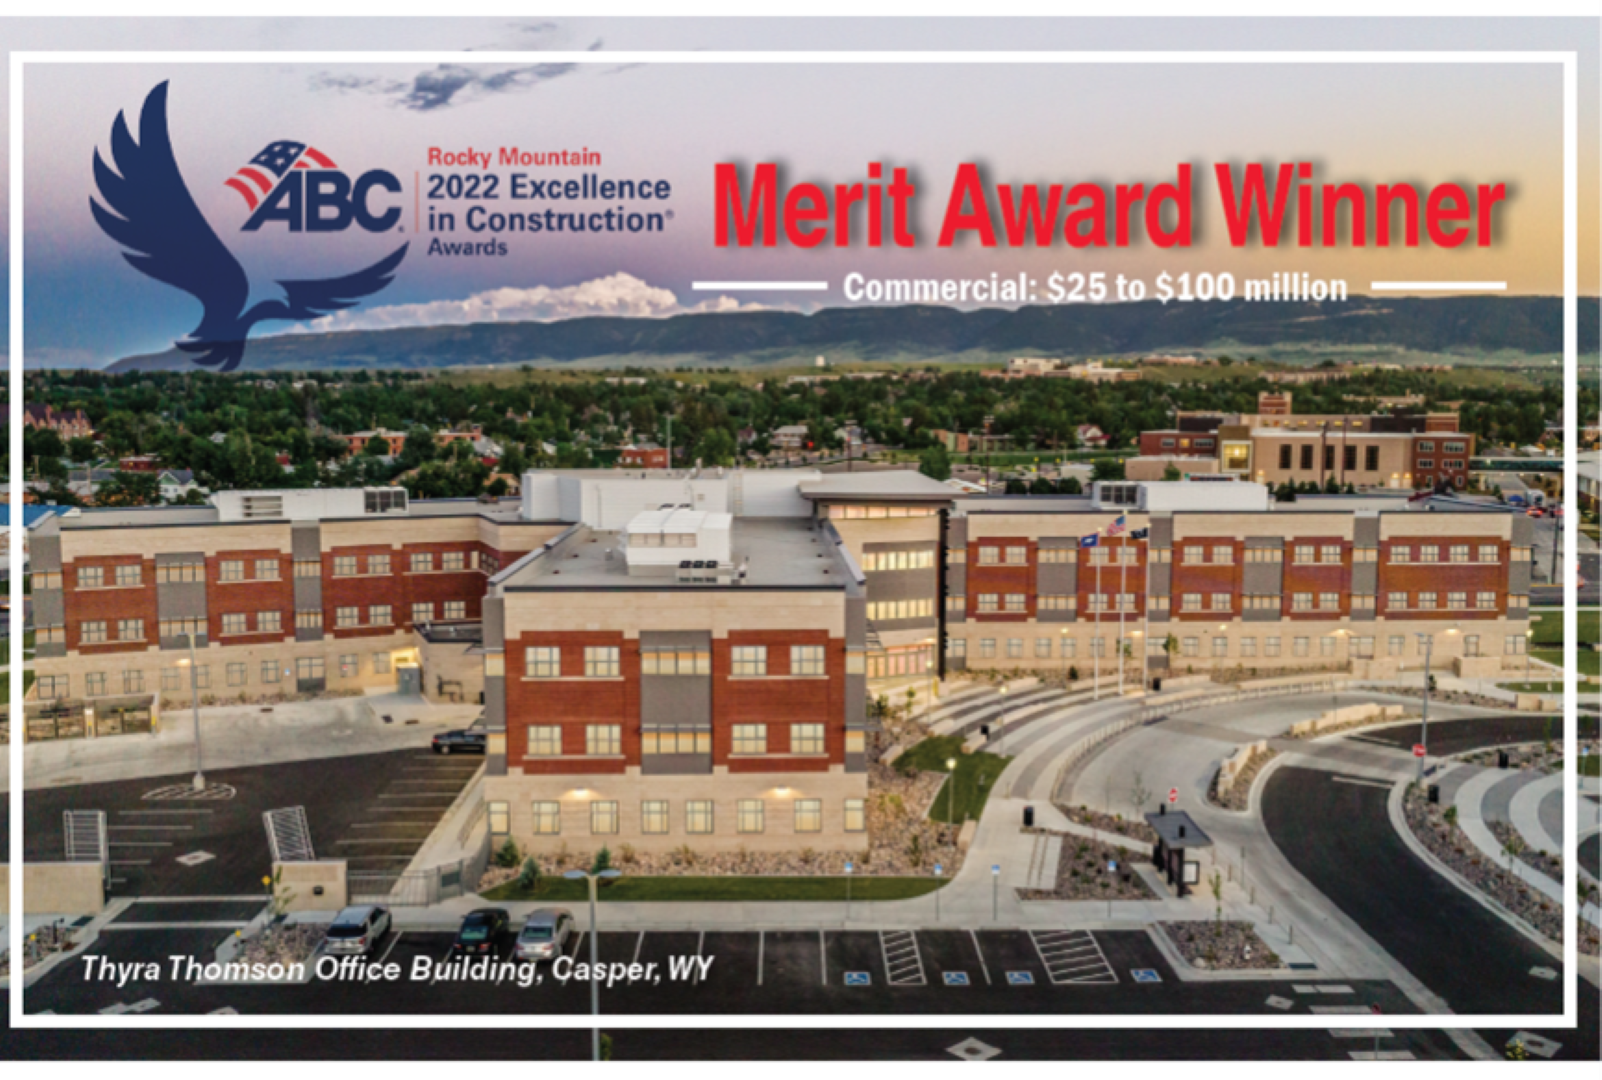 award-rocky mountain-2022-Excellence in Construction (Large).png